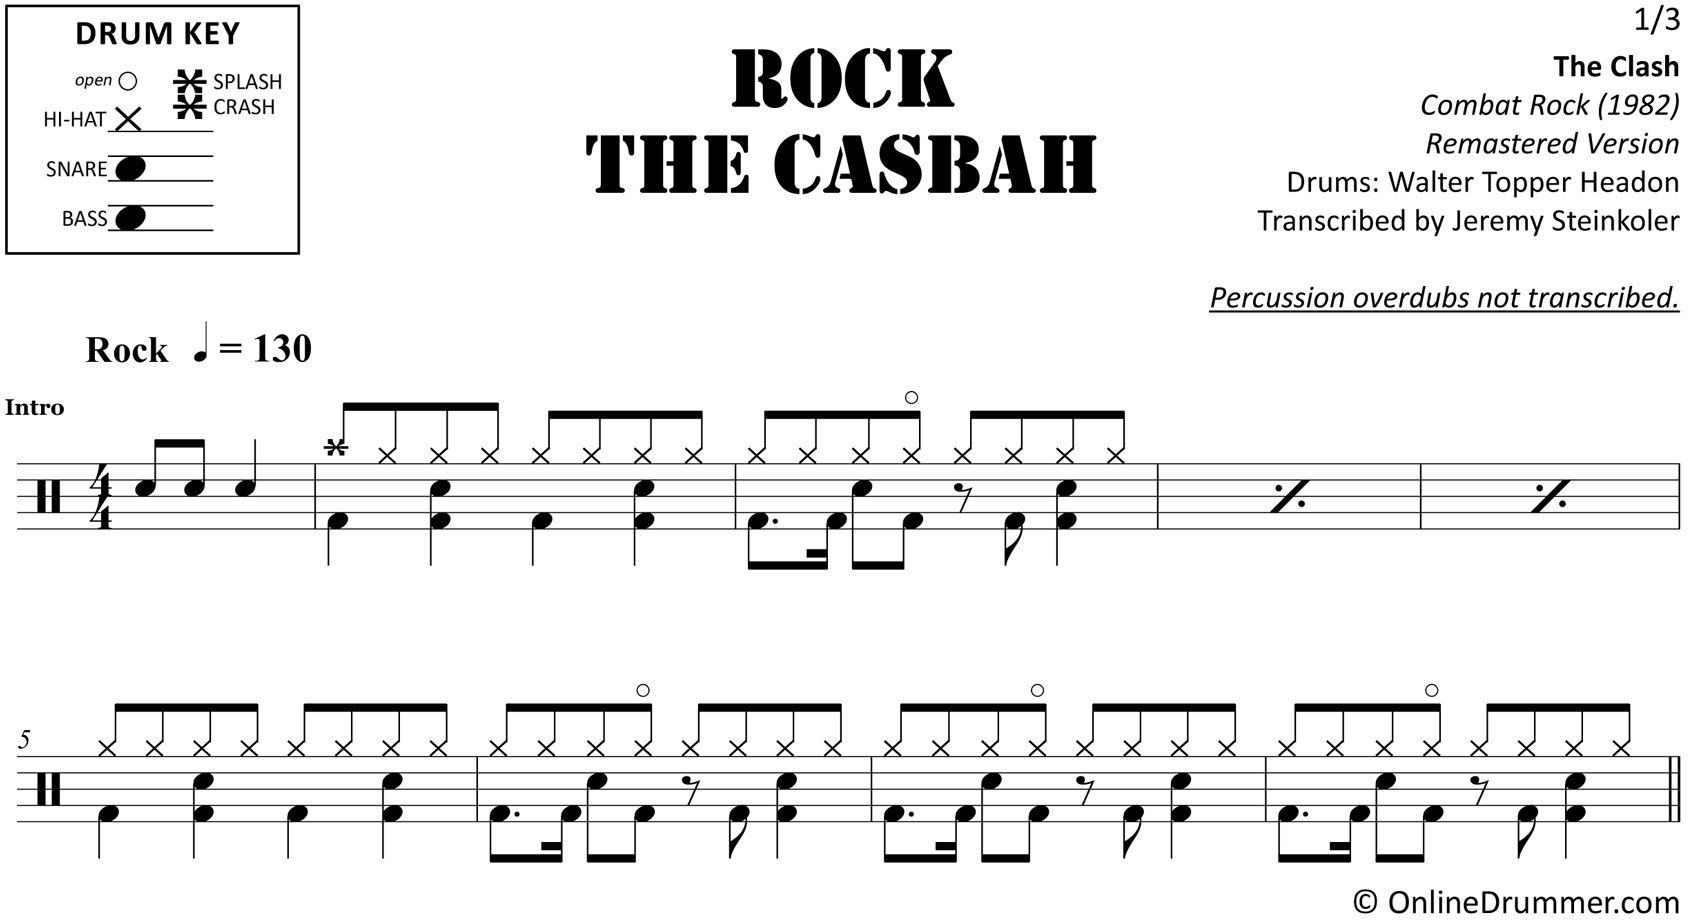 Rock The Casbah - The Clash - Drum Sheet Music